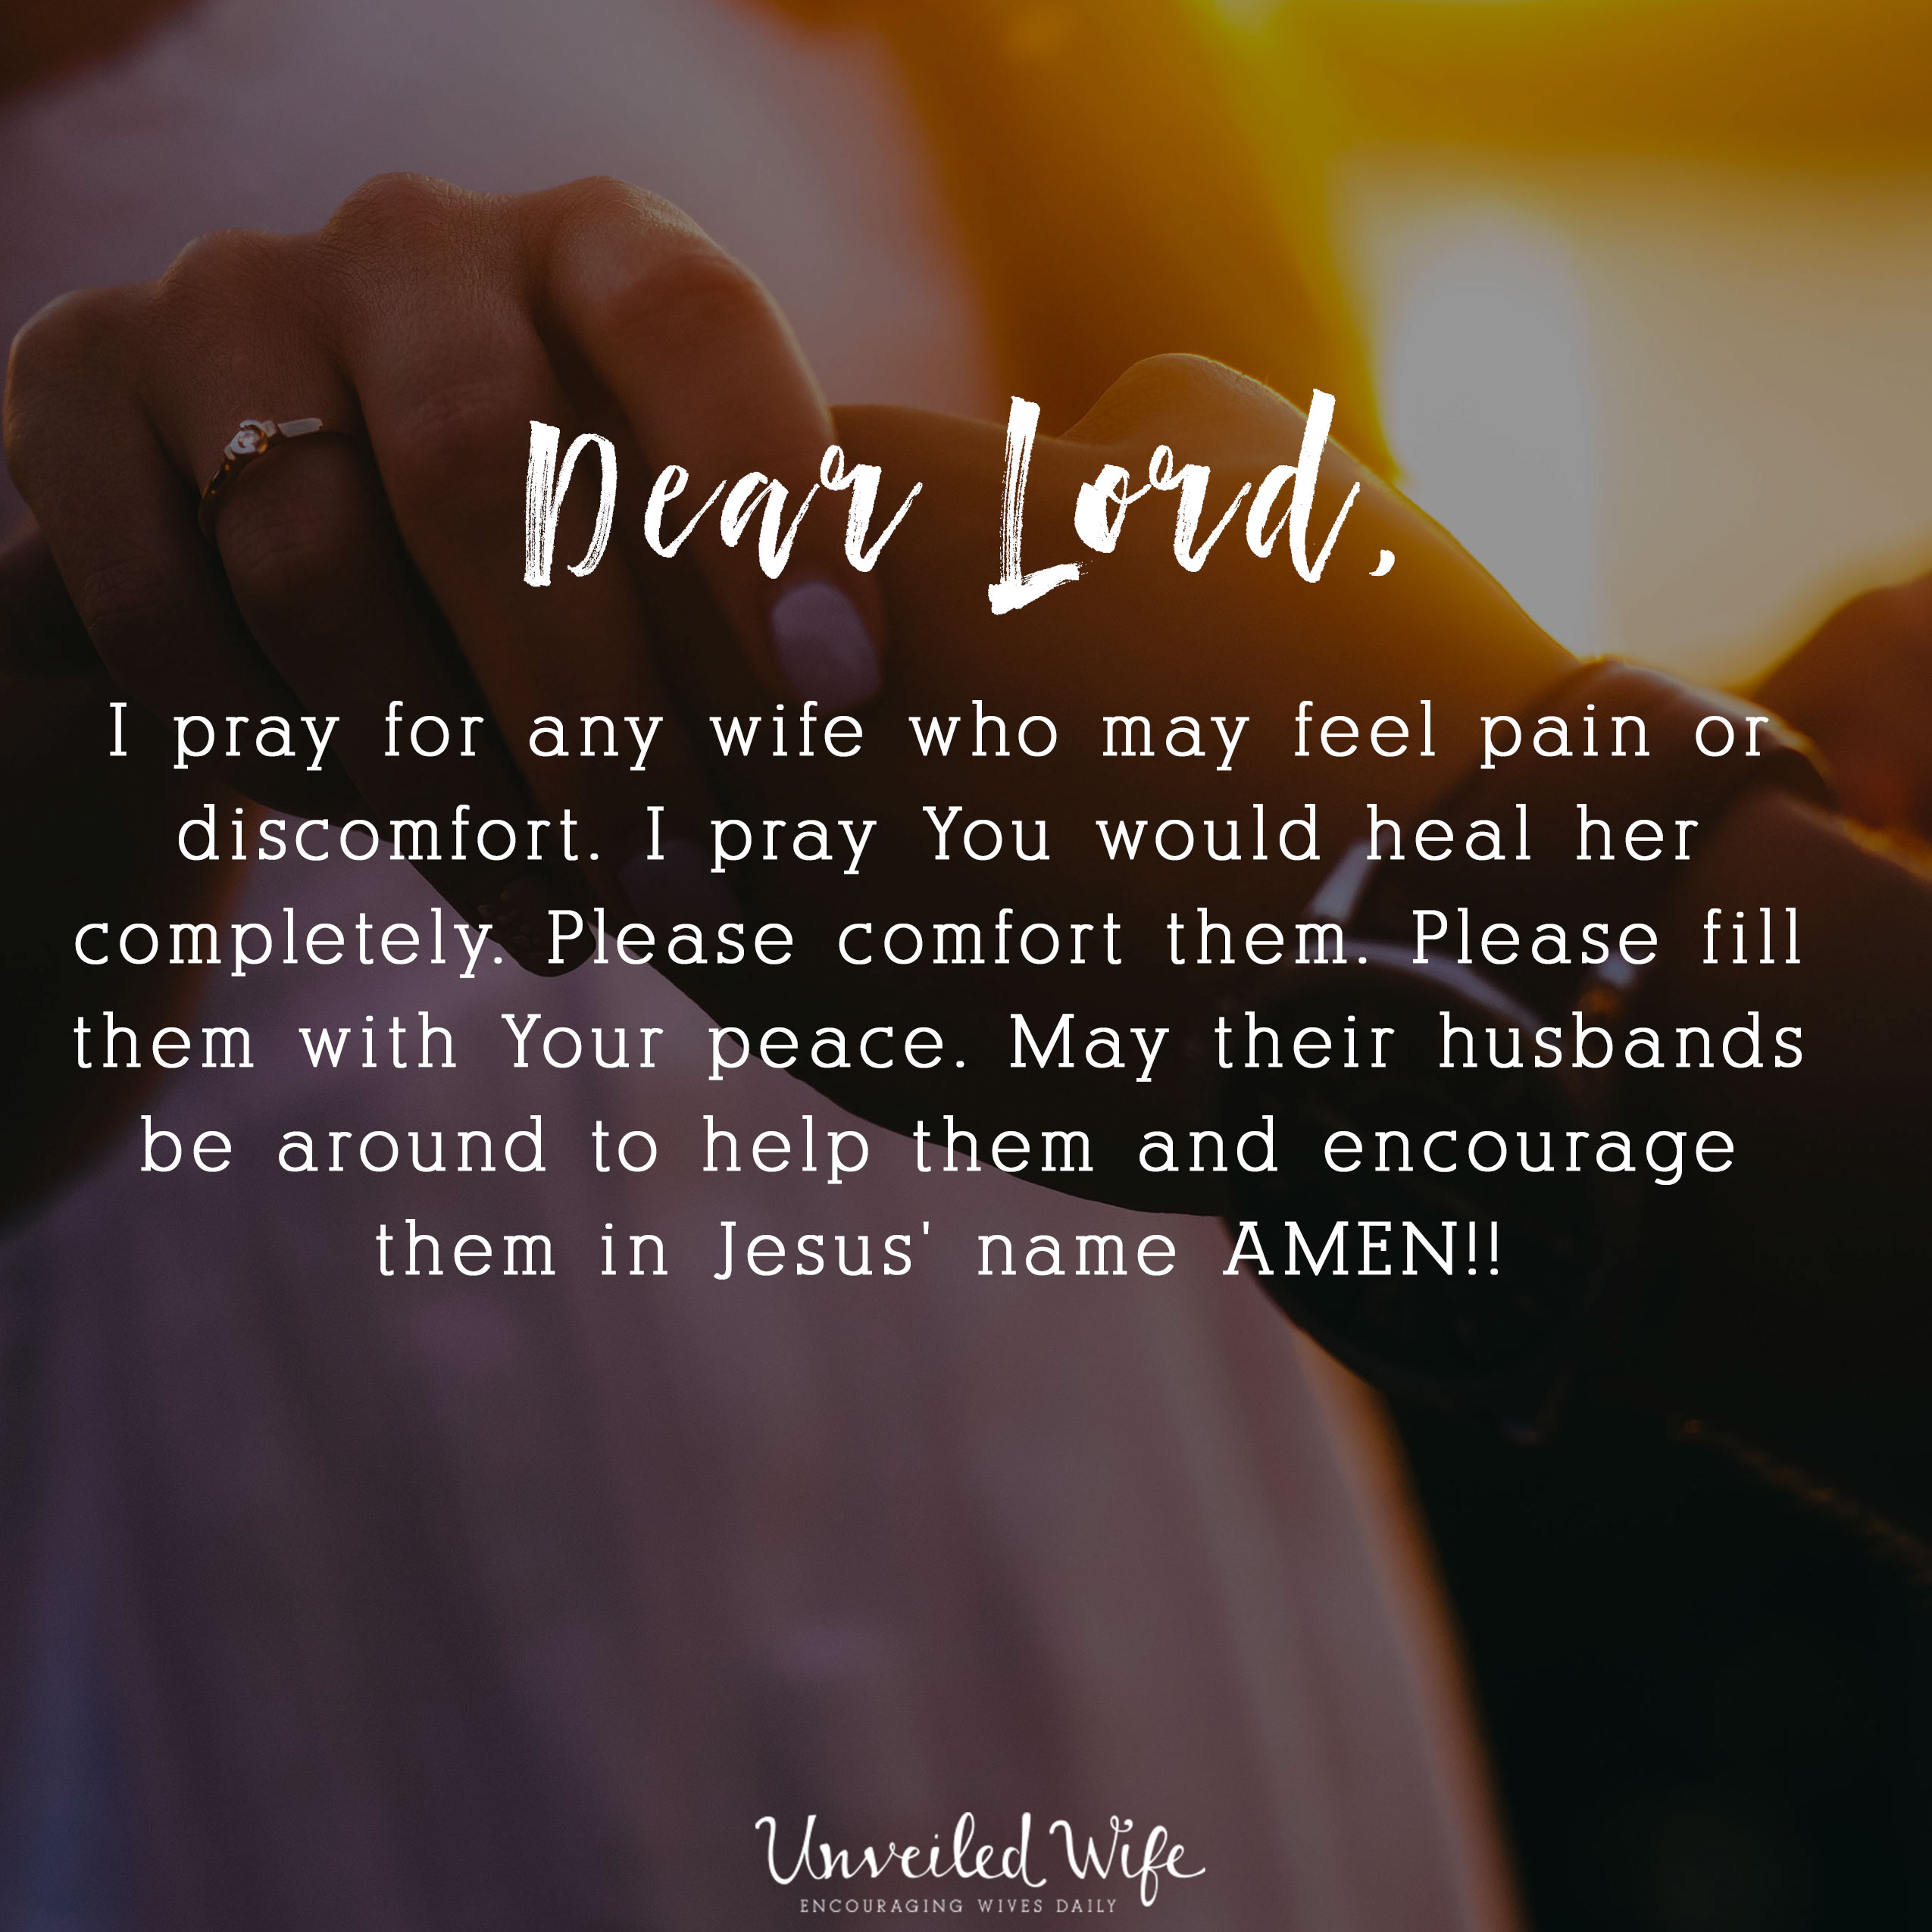 prayer healing prayers physical marriage daily discomfort wife unveiled pain unveiledwife